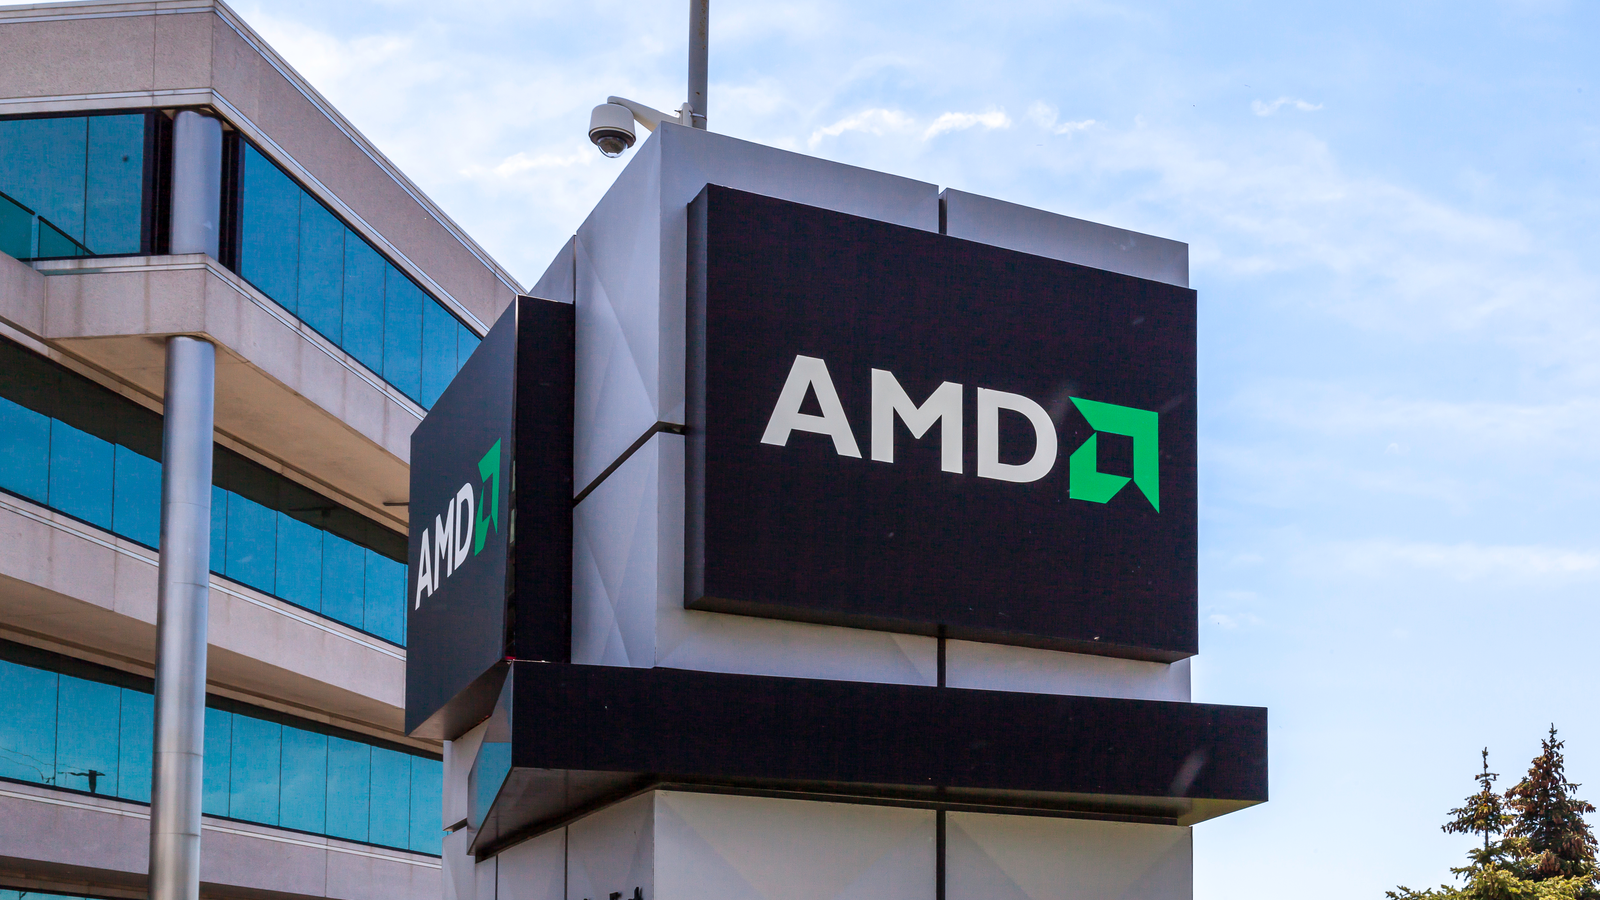 Sign of AMD office in Markham, Ontario, Canada. Advanced Micro Devices, Inc. (AMD) is an American multinational semiconductor company.